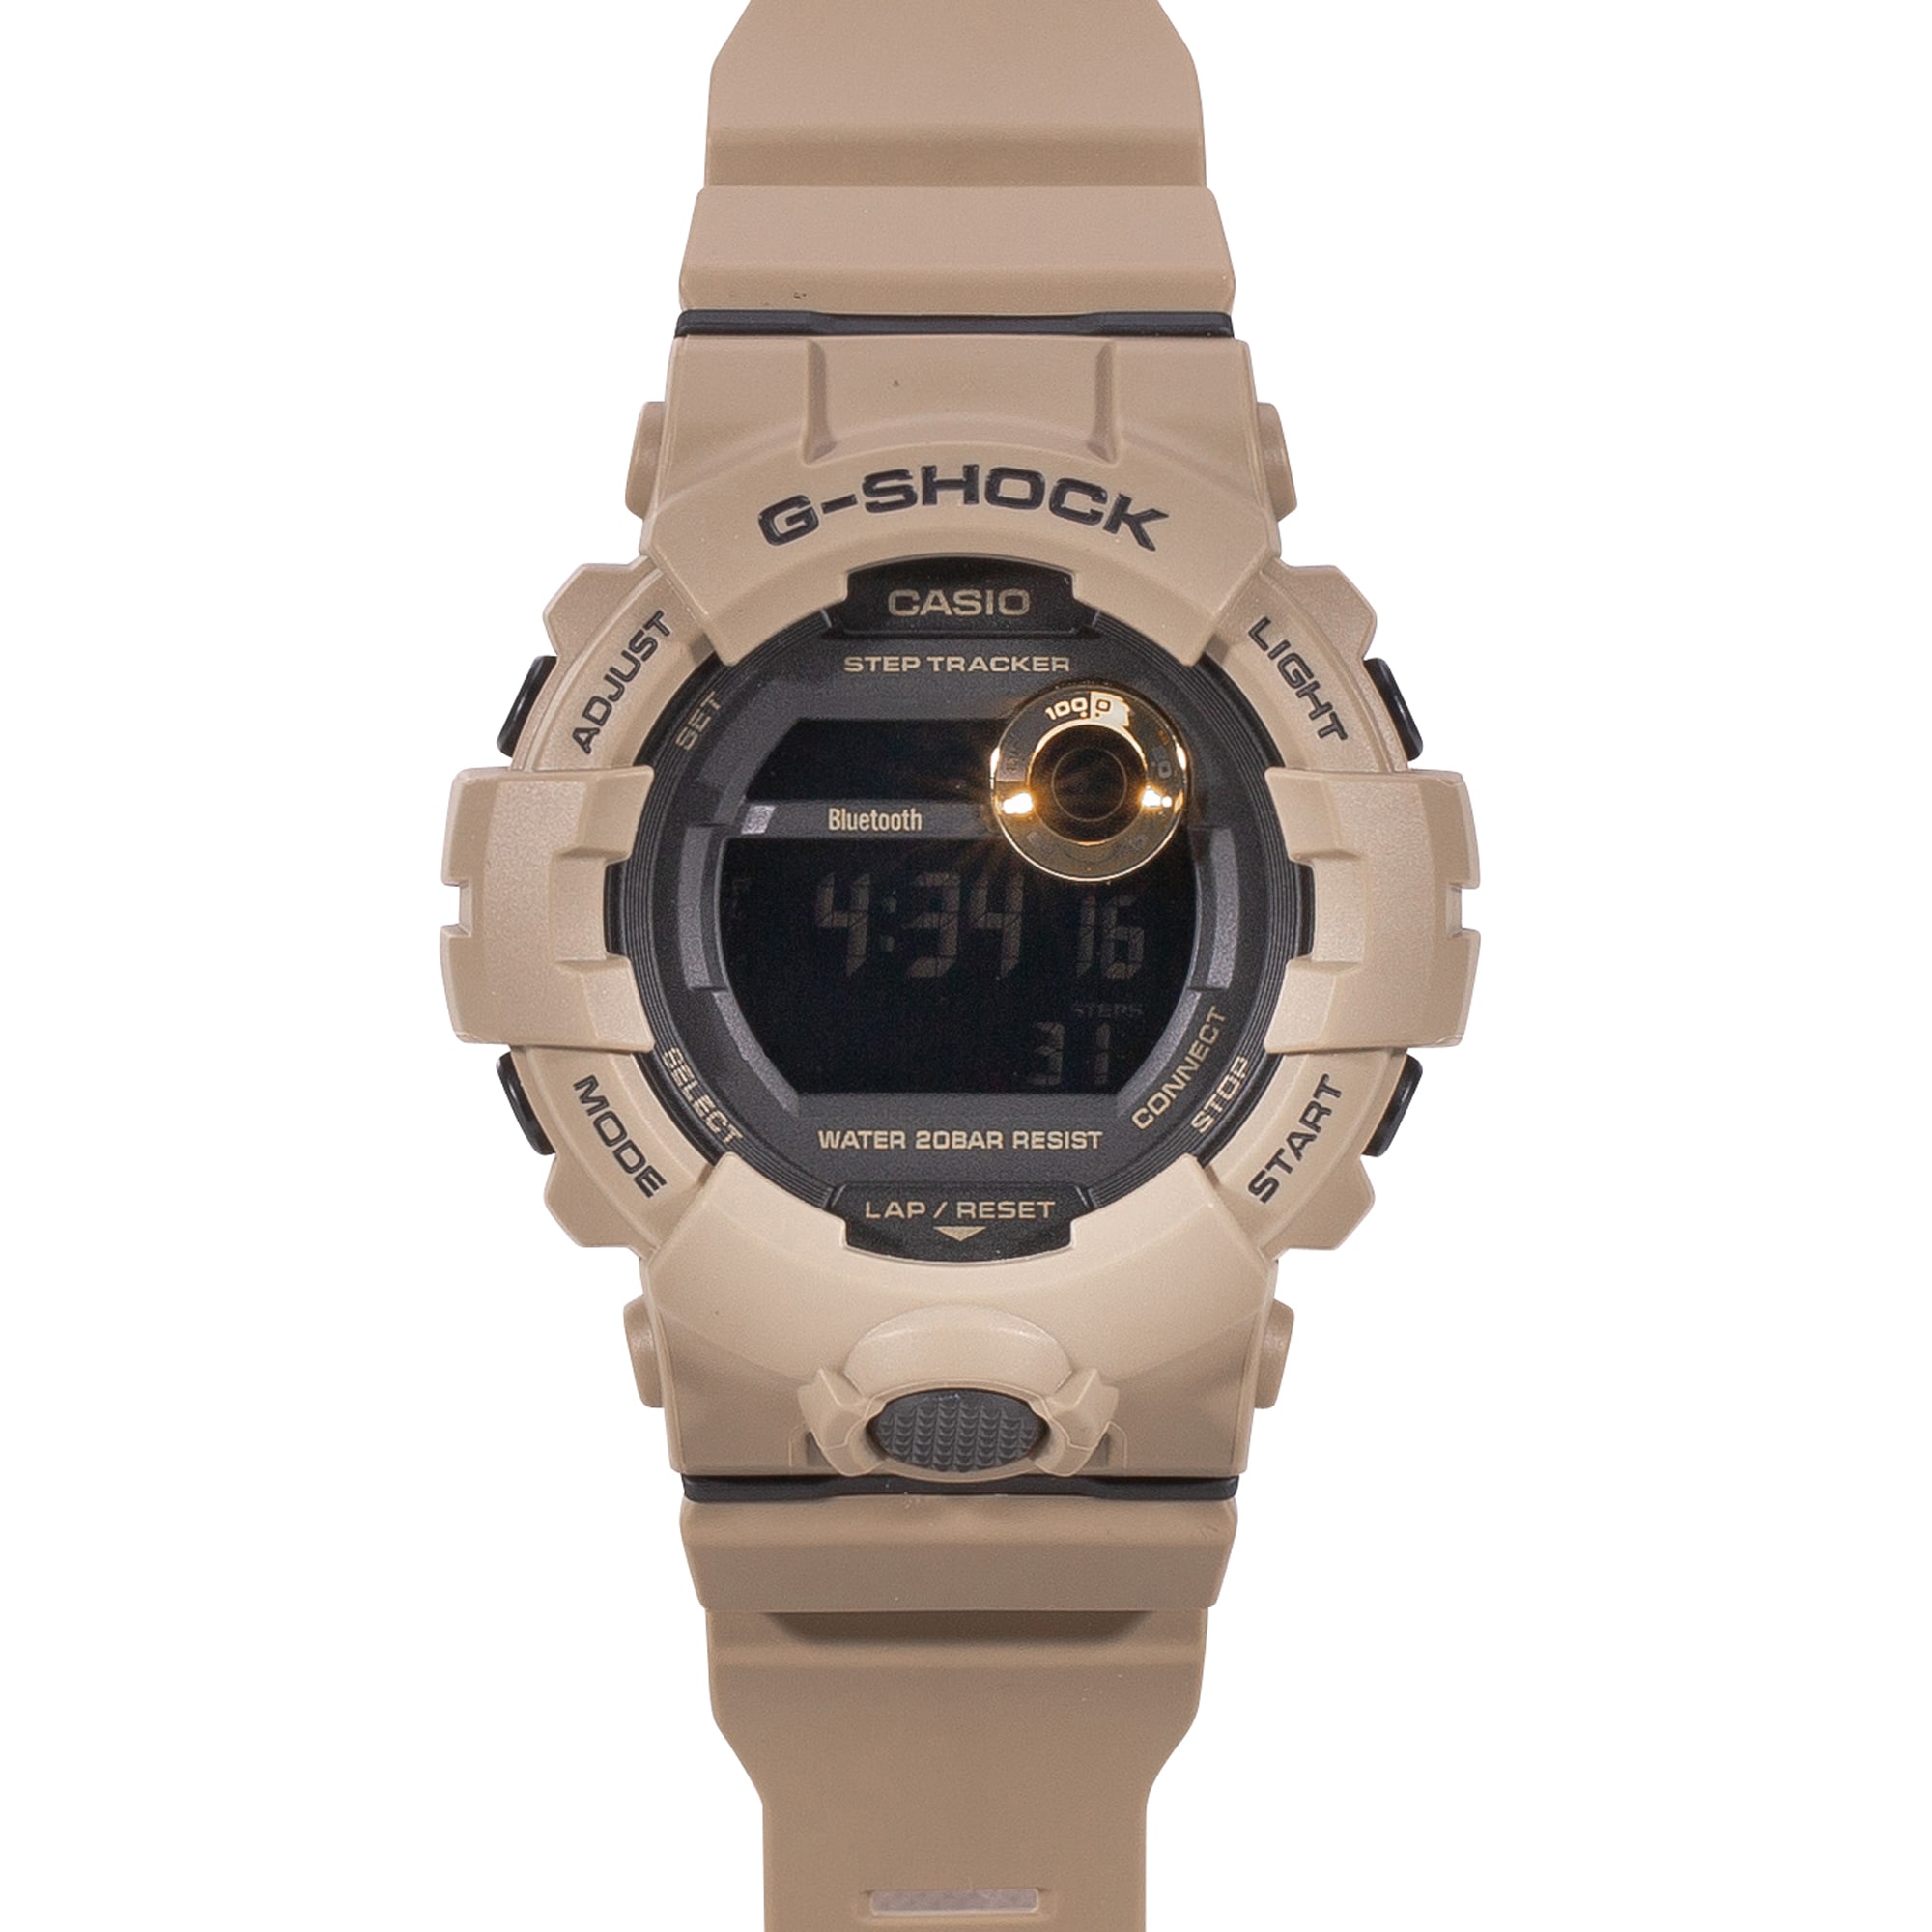 Purchase th Casio Watch coyote by G-Squad G-Shock GBD-800UC-5ER